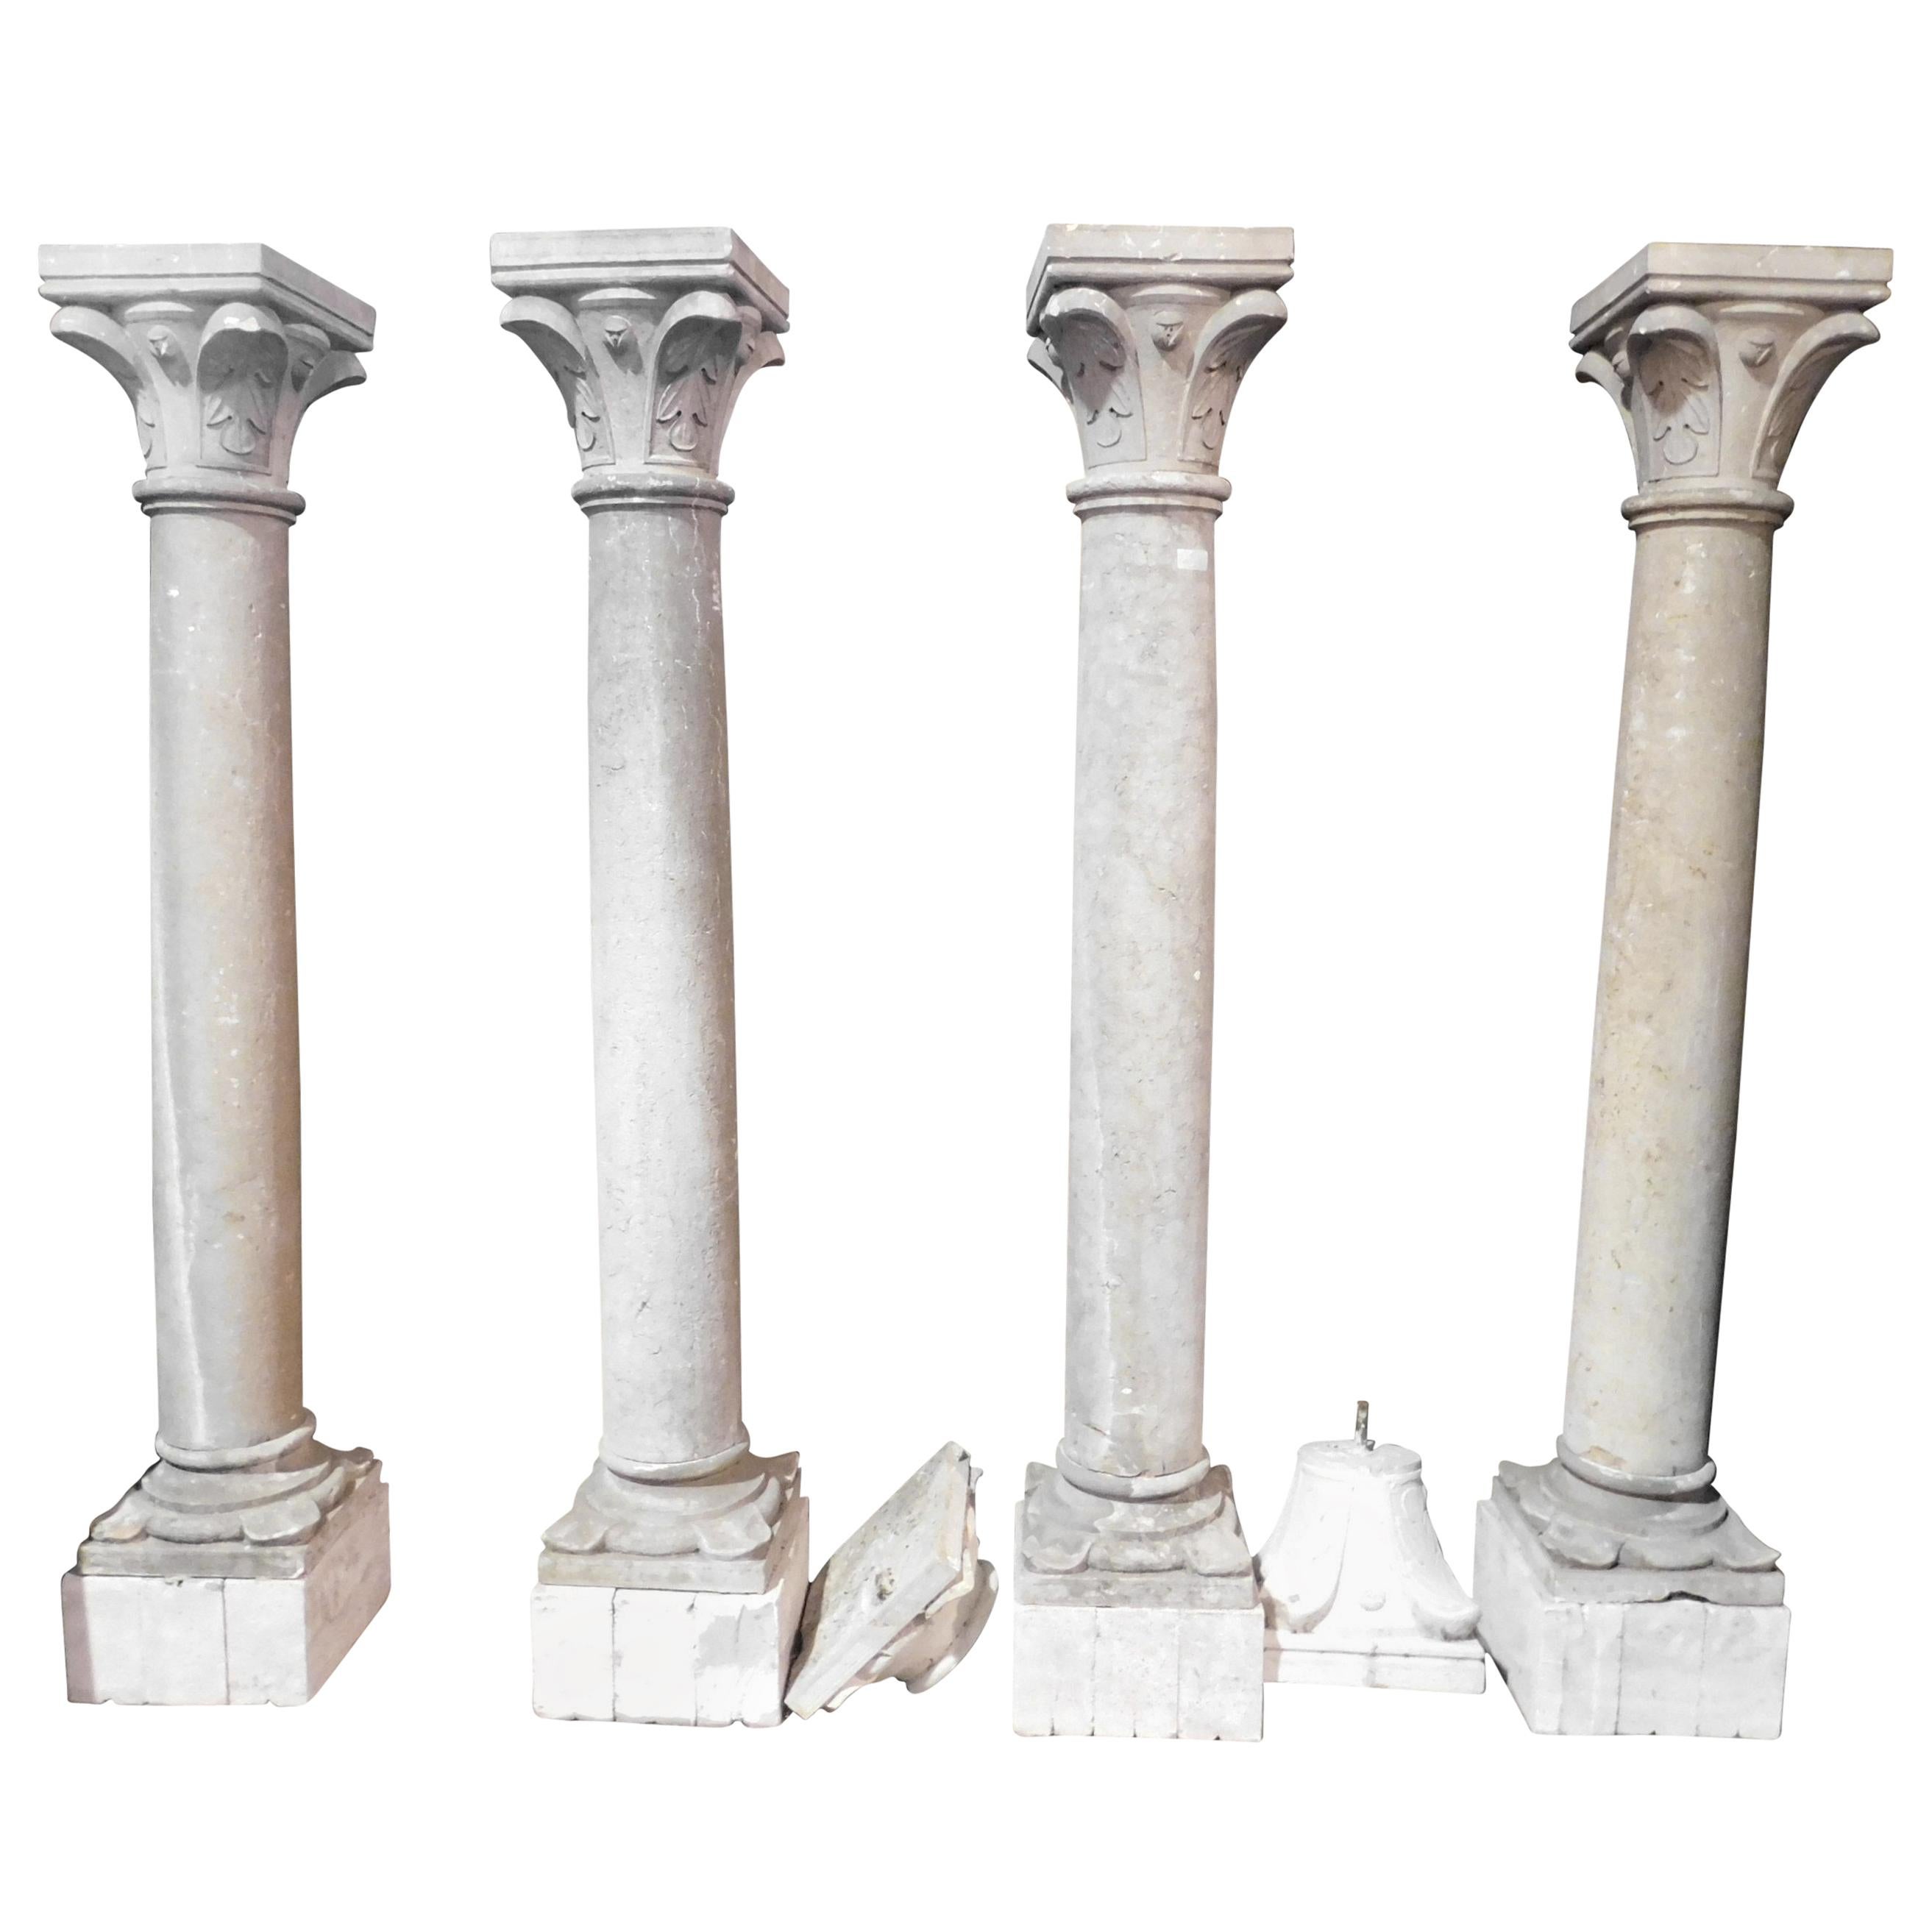 4 Antique Botticino Stone Columns, Bases and Sculpted Capitals, 1700, Italy